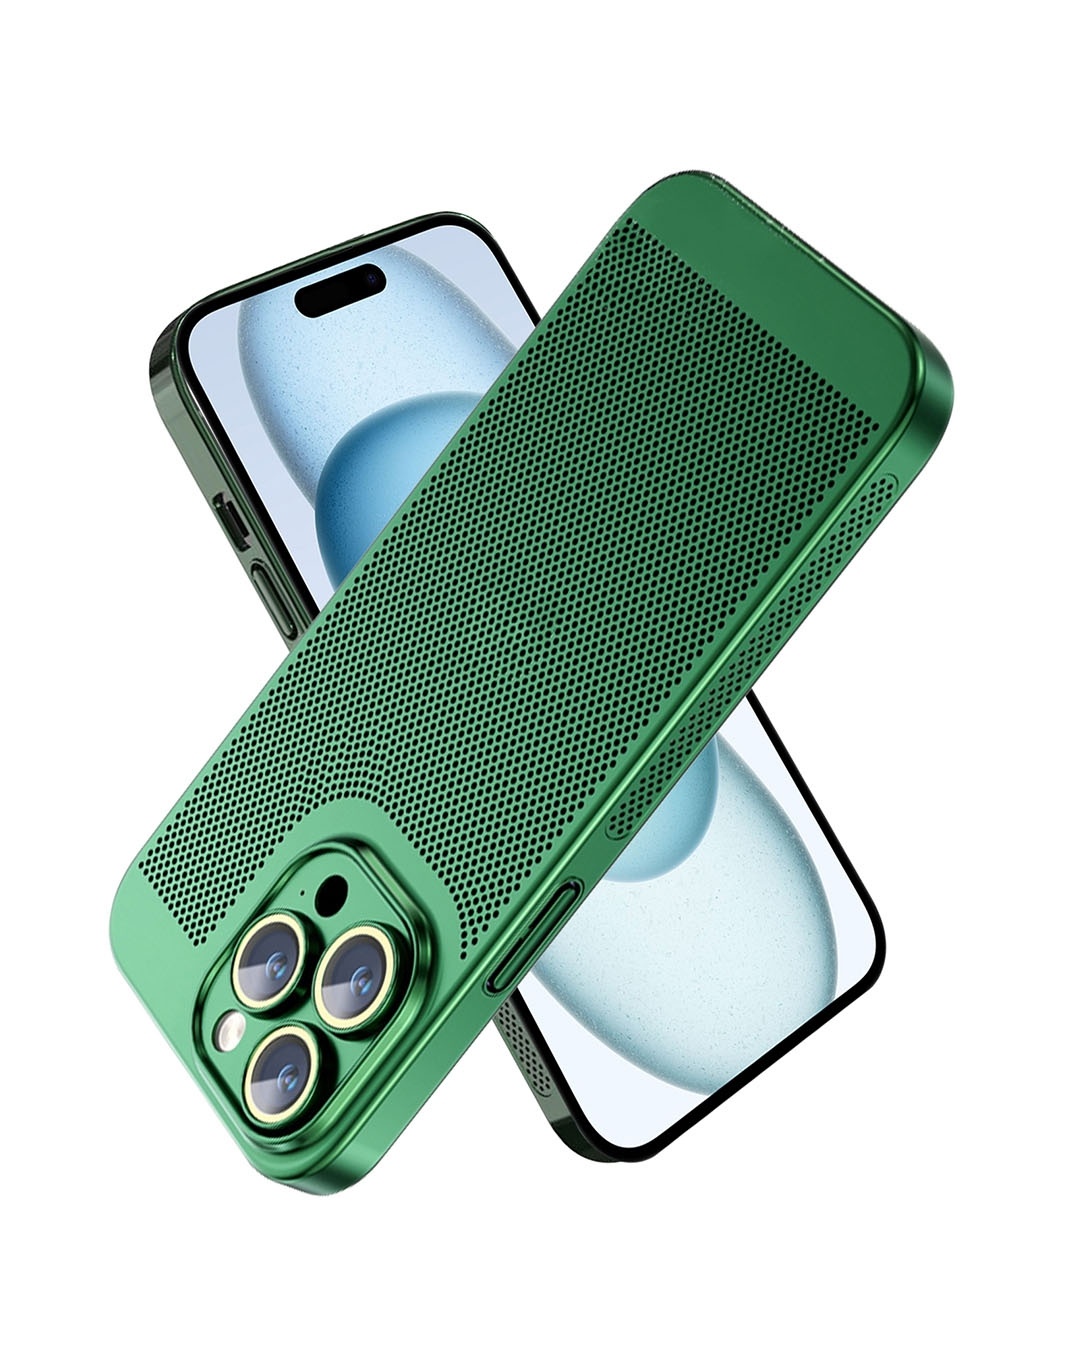 https://images.bewakoof.com/t1080/green-camera-protection-case-for-apple-iphone-15-pro-max-628516-1701720830-1.jpg